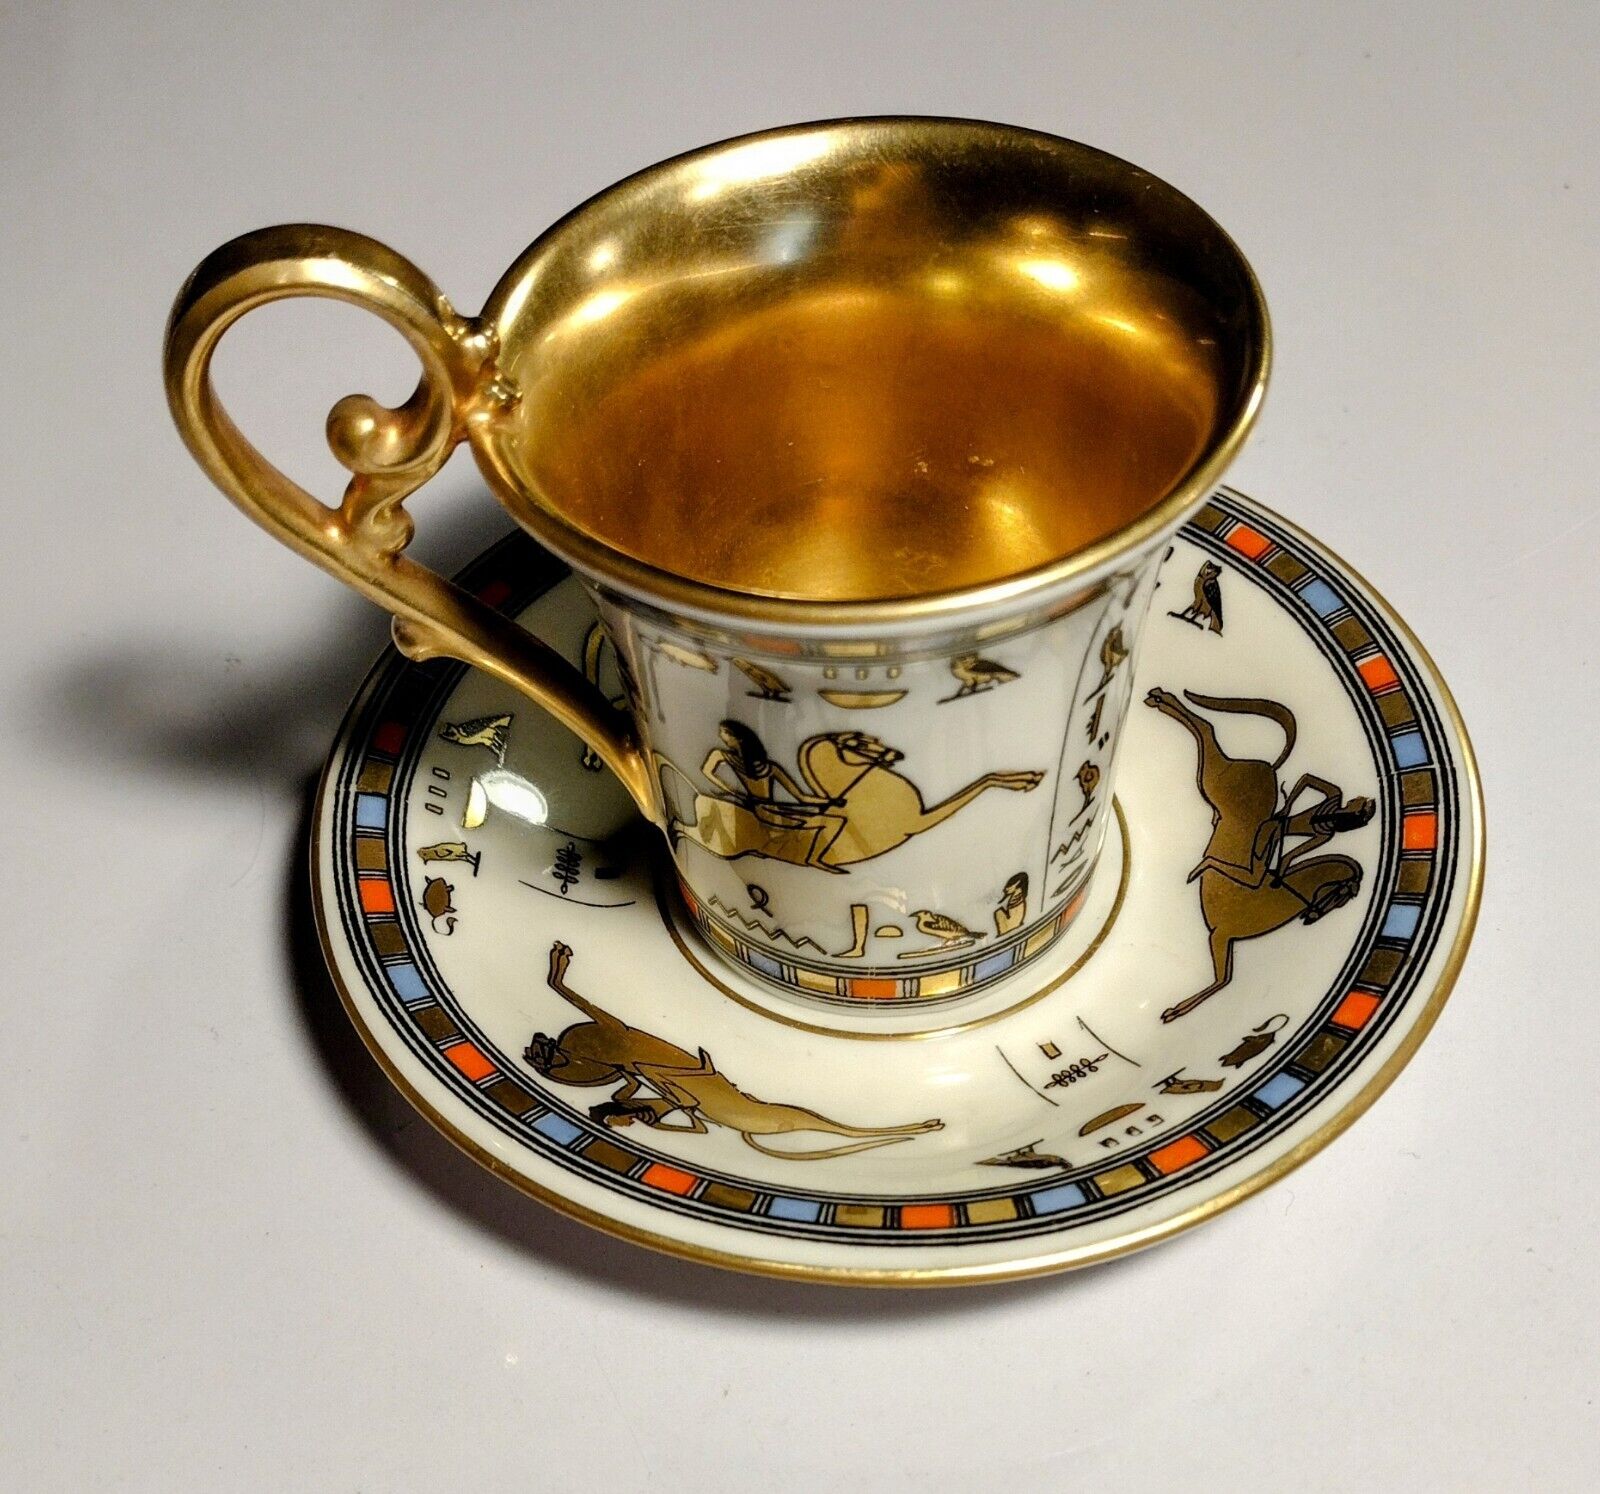 Alka Kunst Alboth Kaiser Egyptian Revival Cup and Saucer 1666 B.R. Heavy Gold